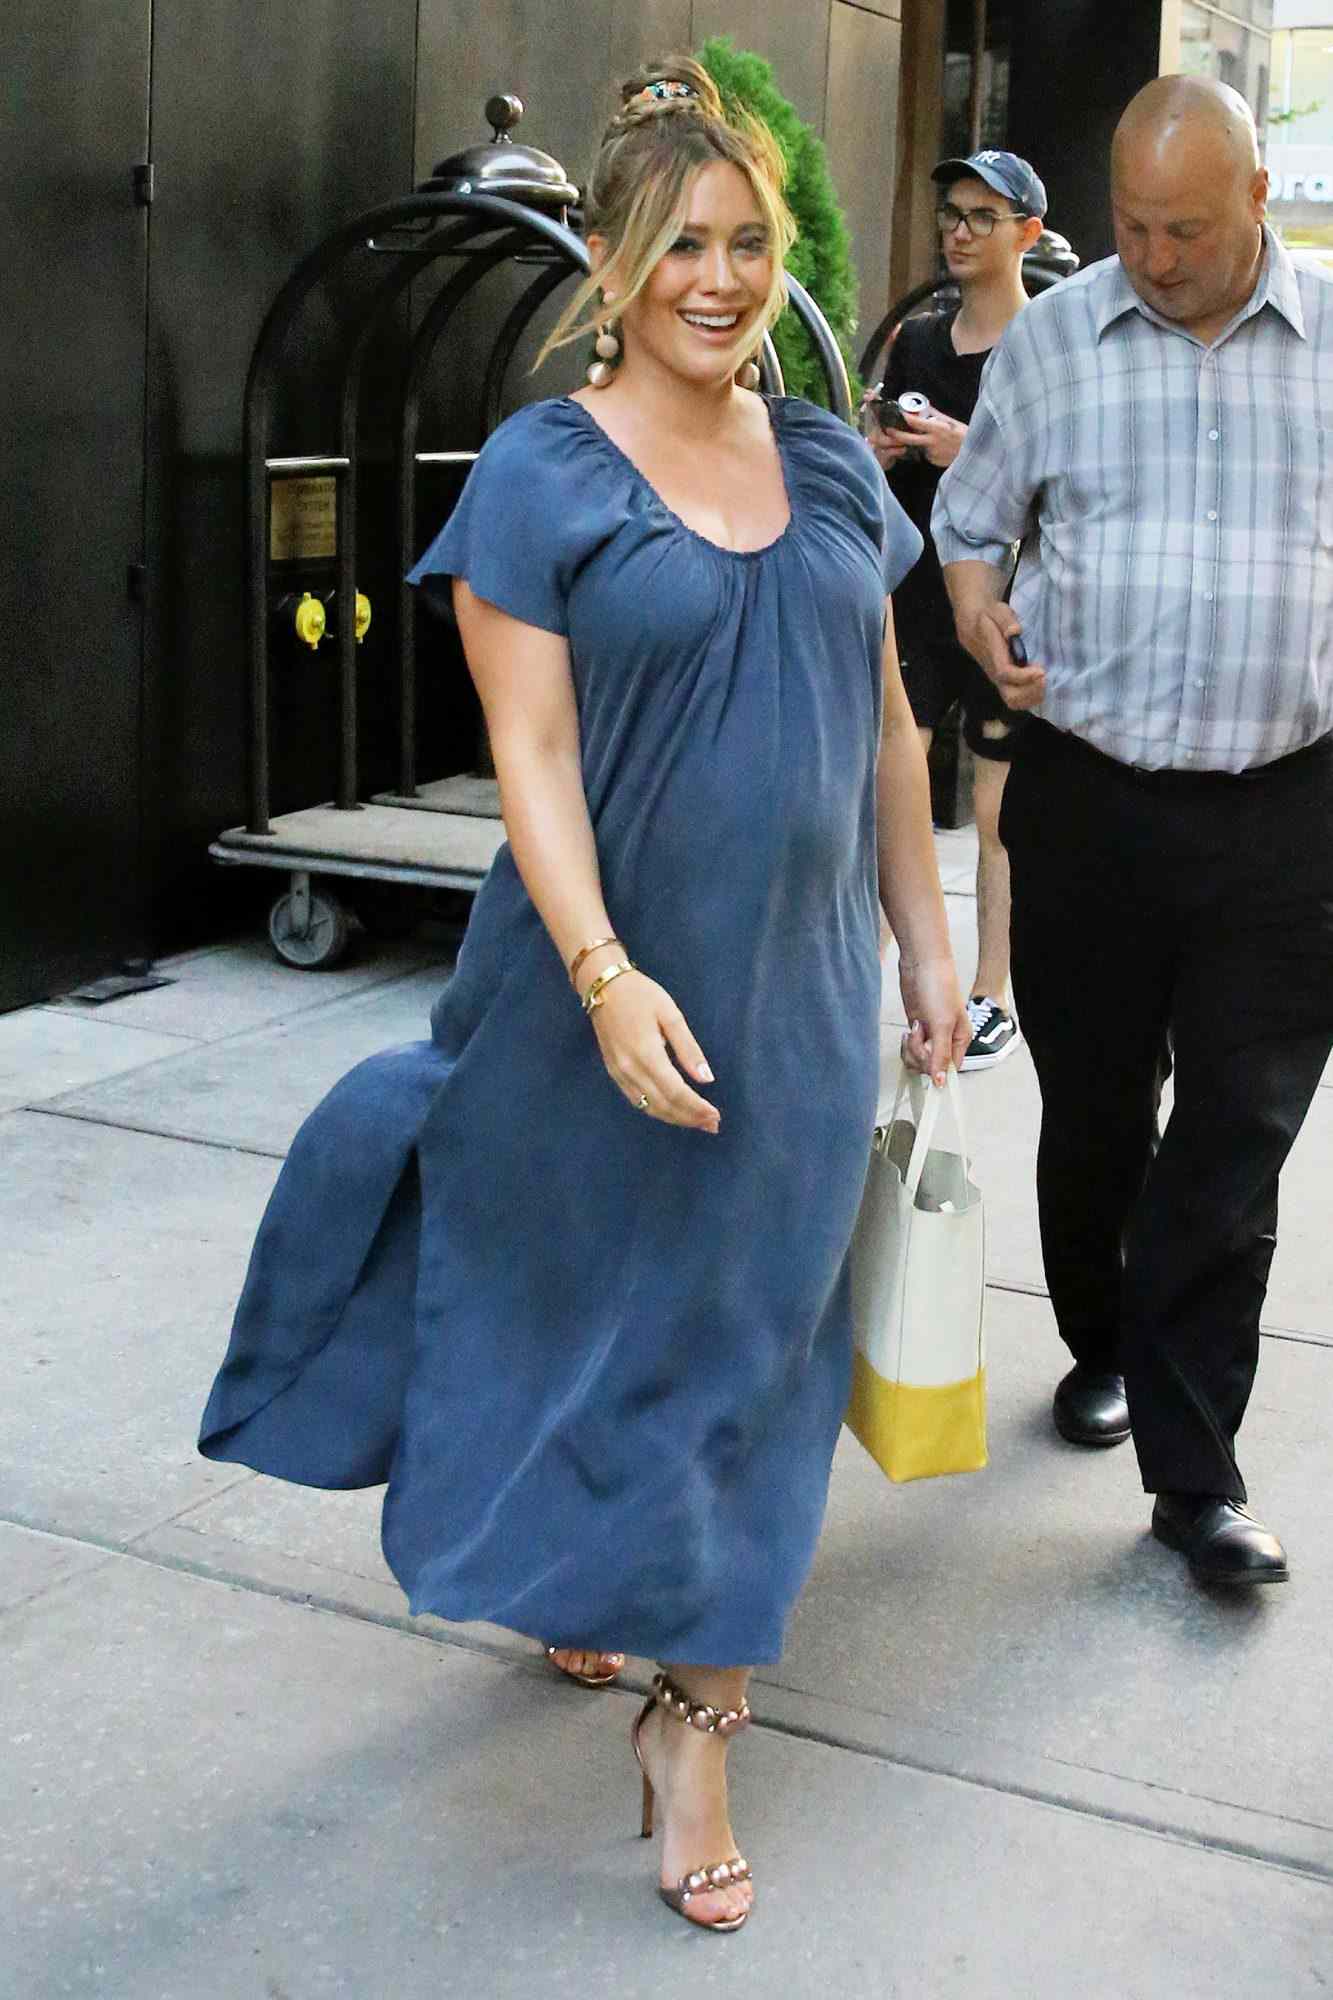 Pregnant in heels cast